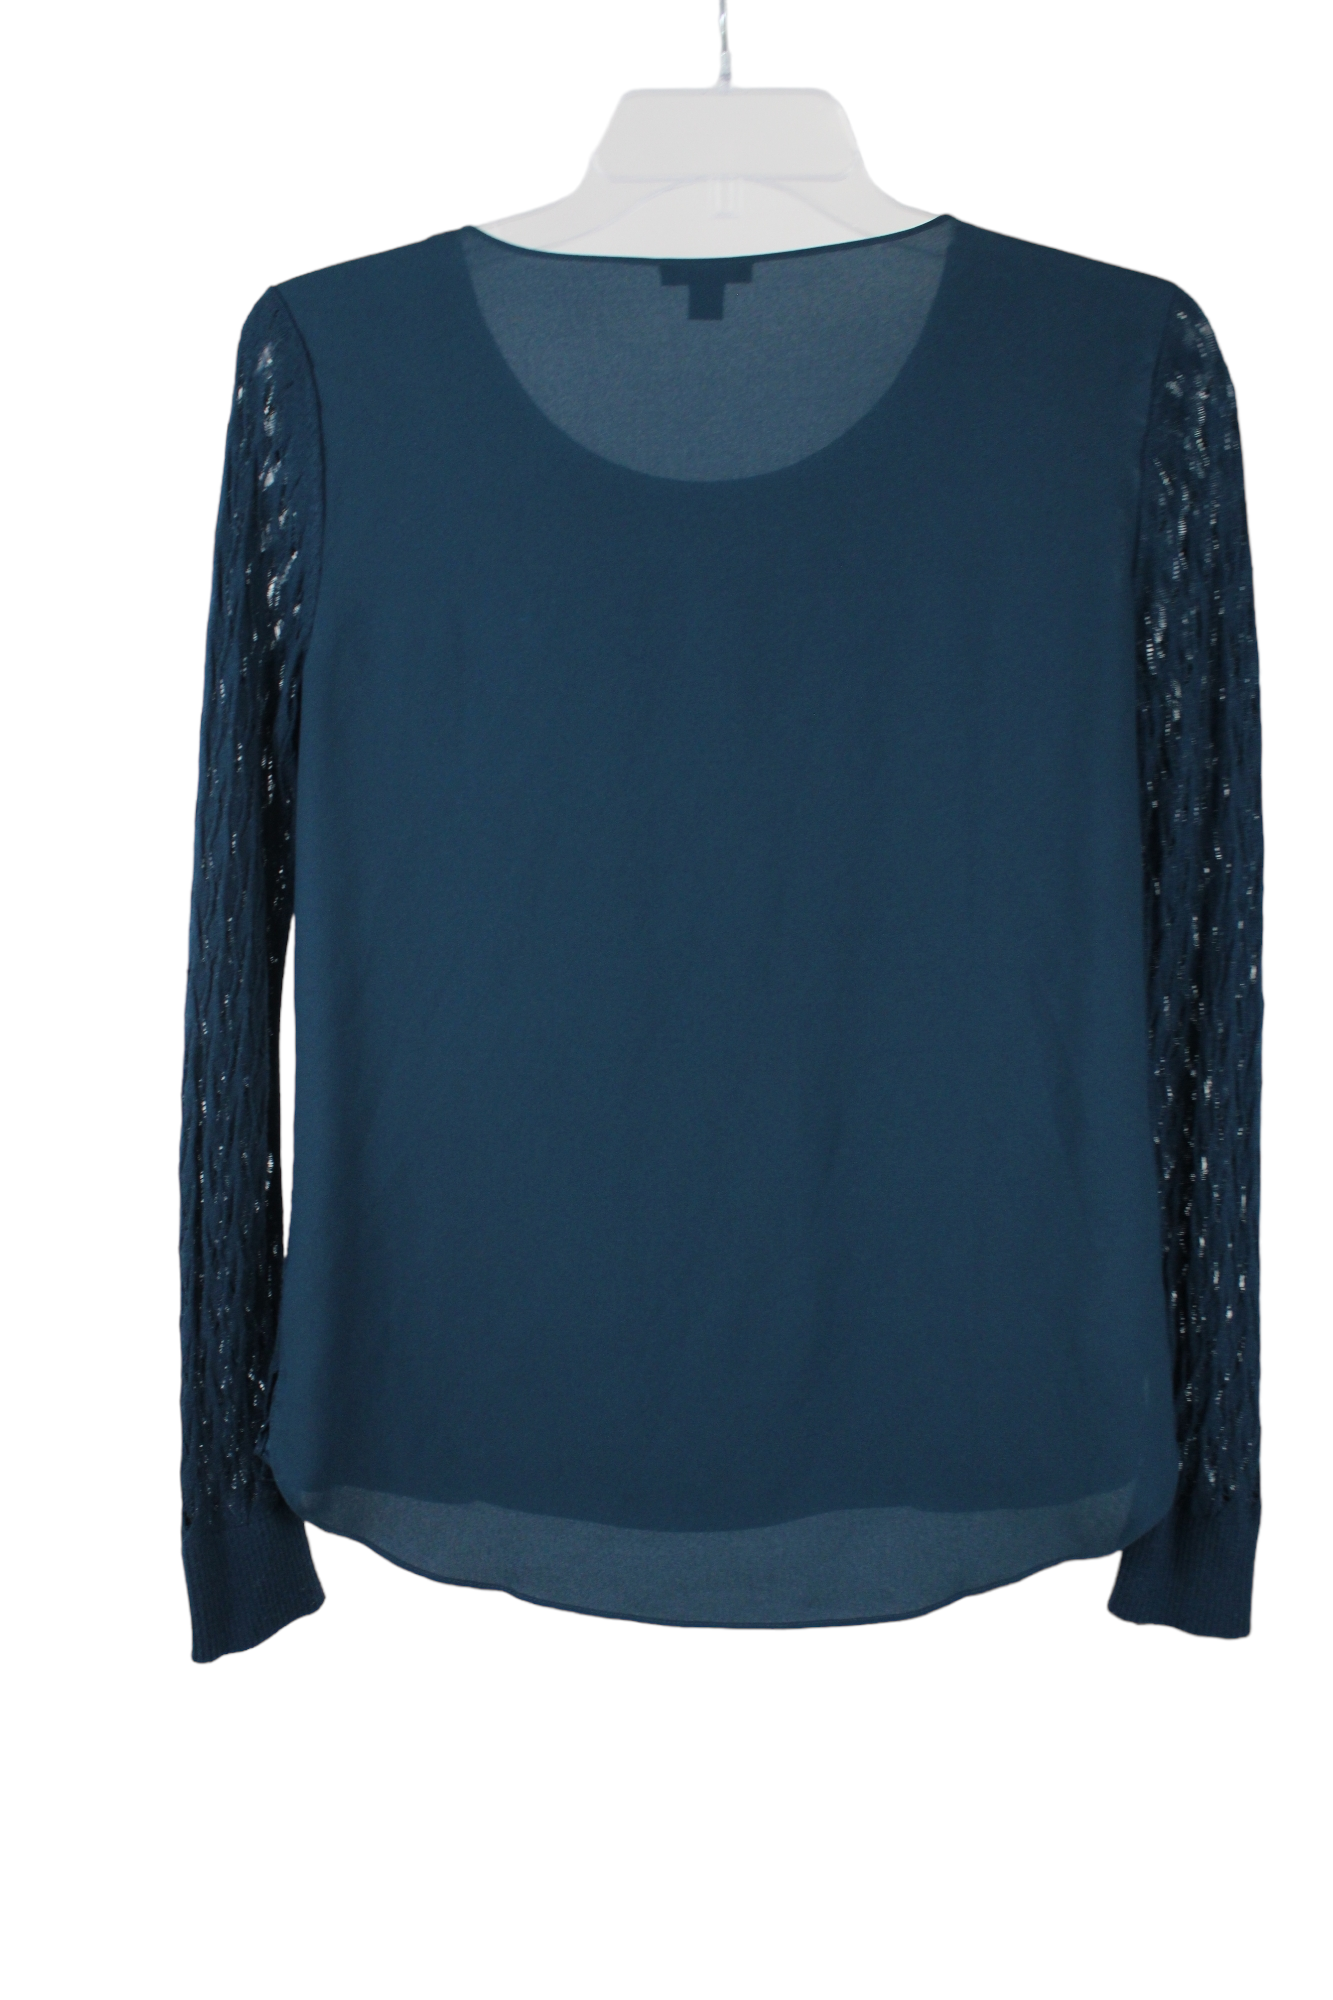 Ann Taylor Dark Teal Knit Front Top | S